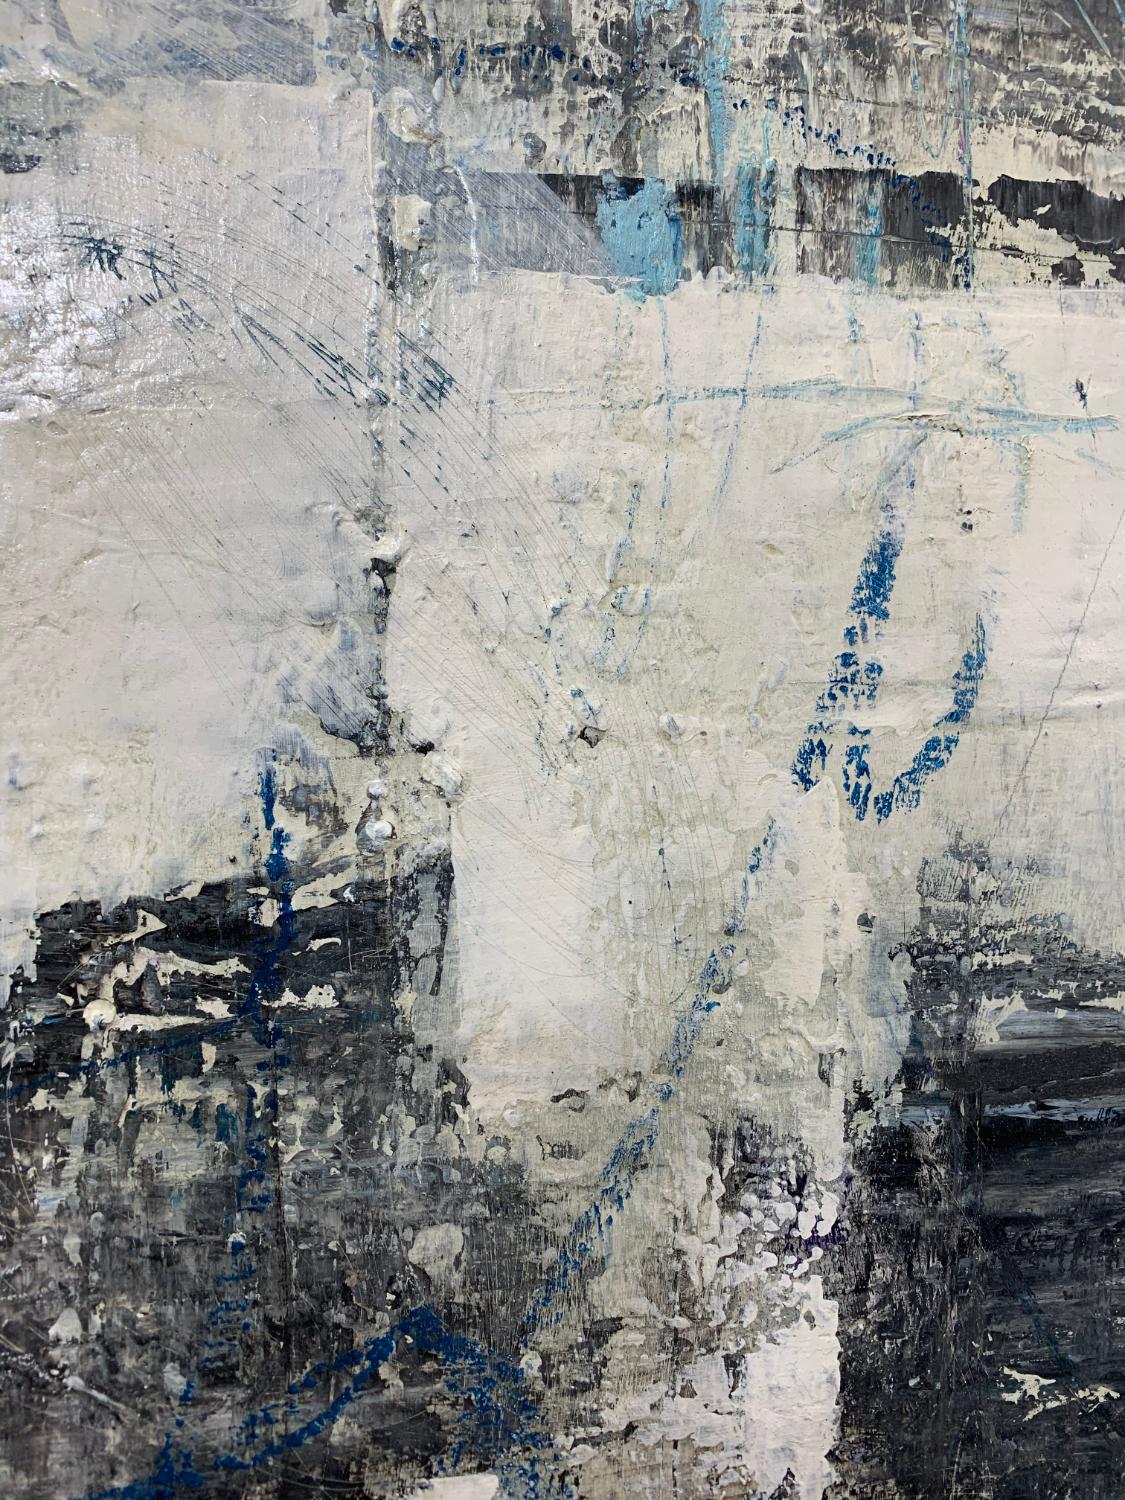 <p>Artist Comments<br>A densely layered image in blue, black, white and yellow, with intricate texture and mark-making through the surface. 